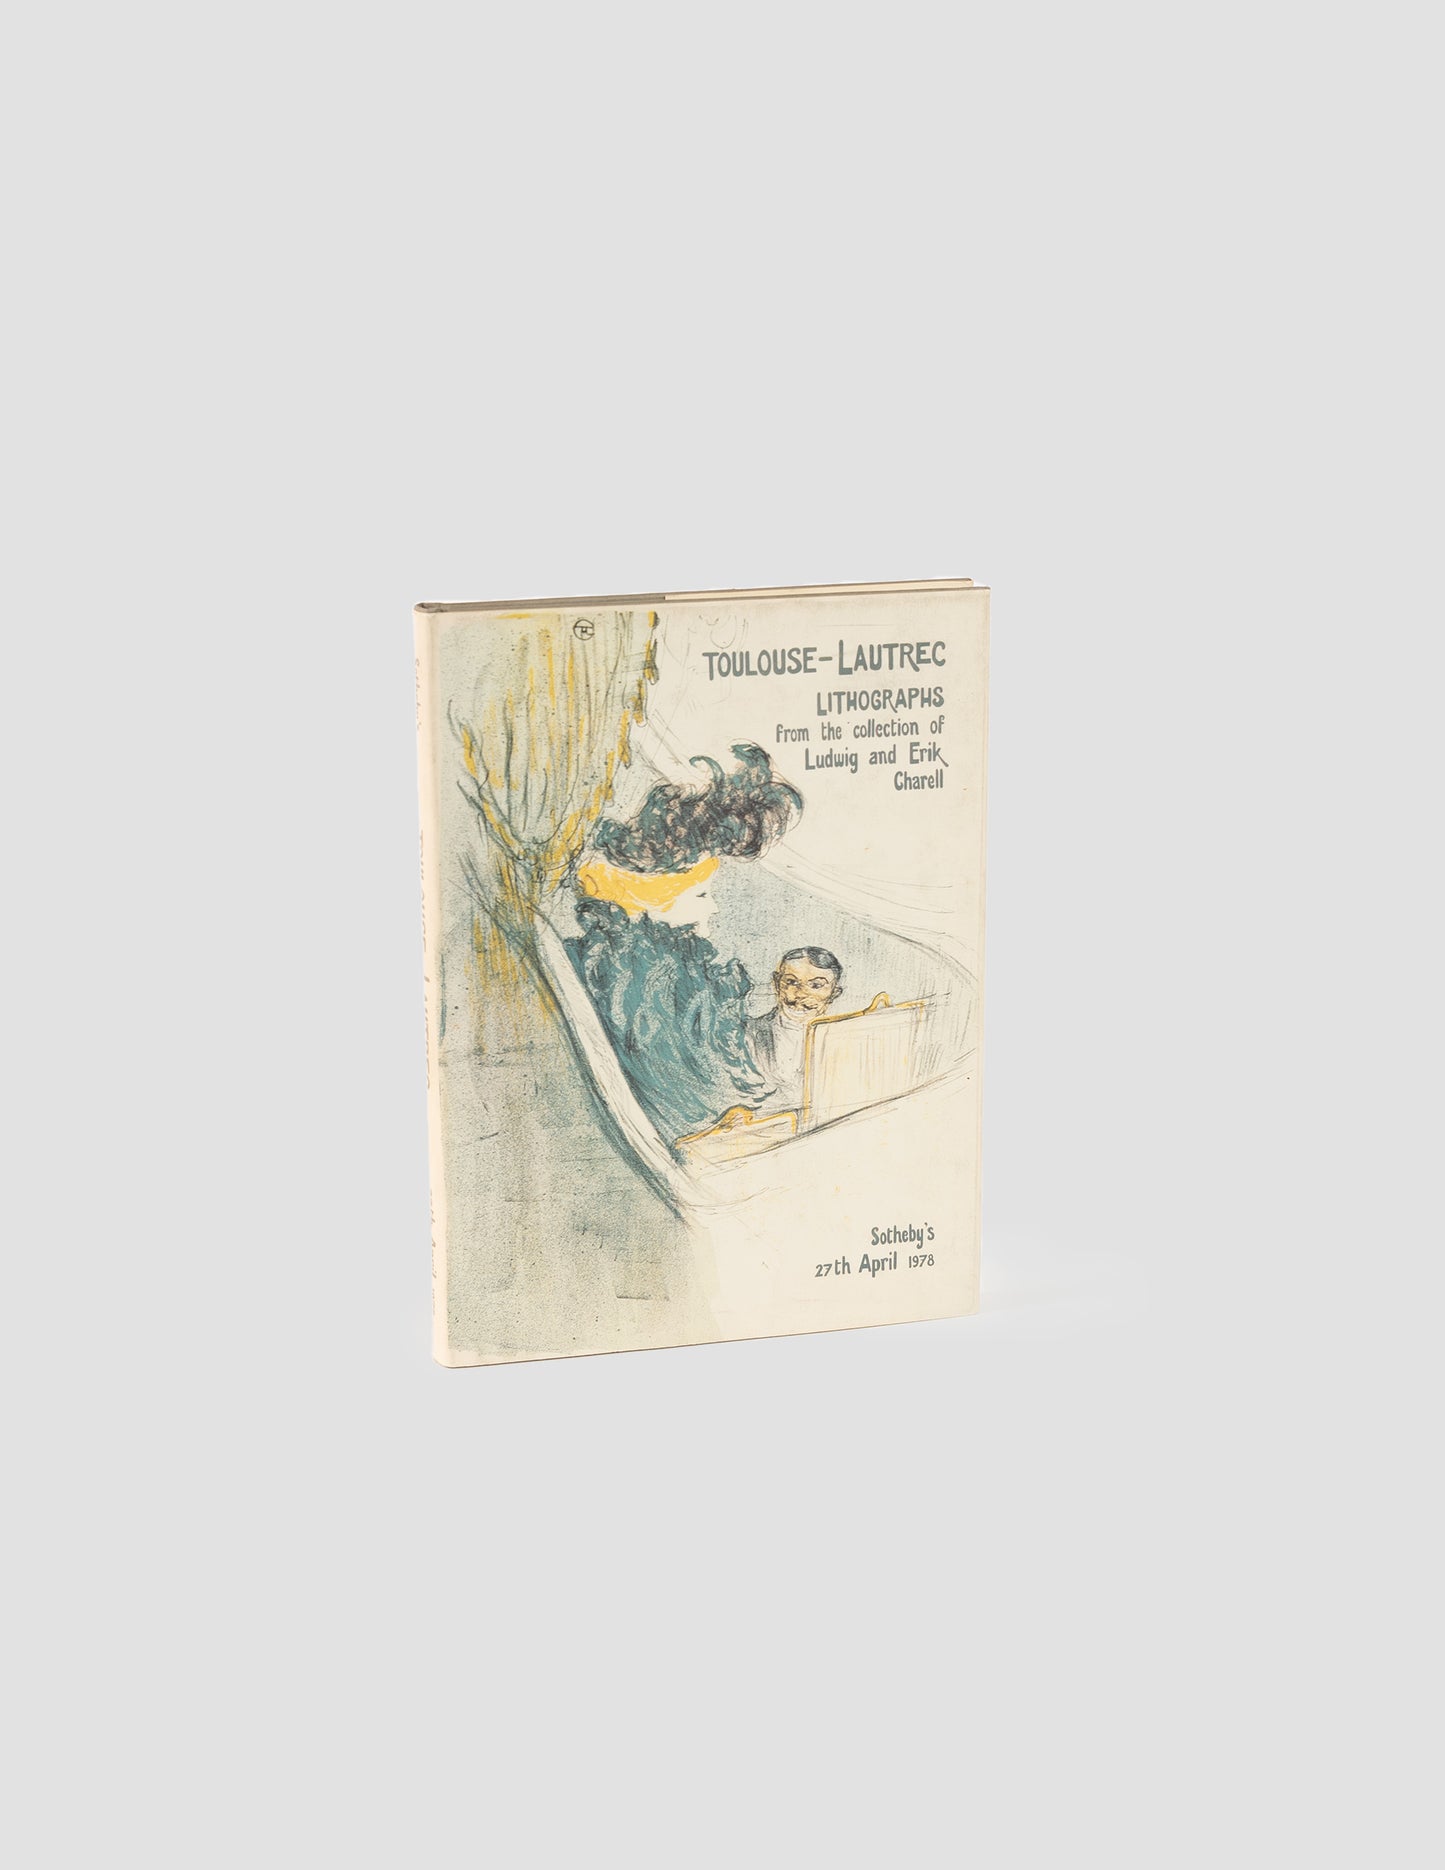 Vintage Sotheby's® Catalogue of Henri De Toulouse-Lautrec Lithographs from the Collection of Ludwig and Erik Charell